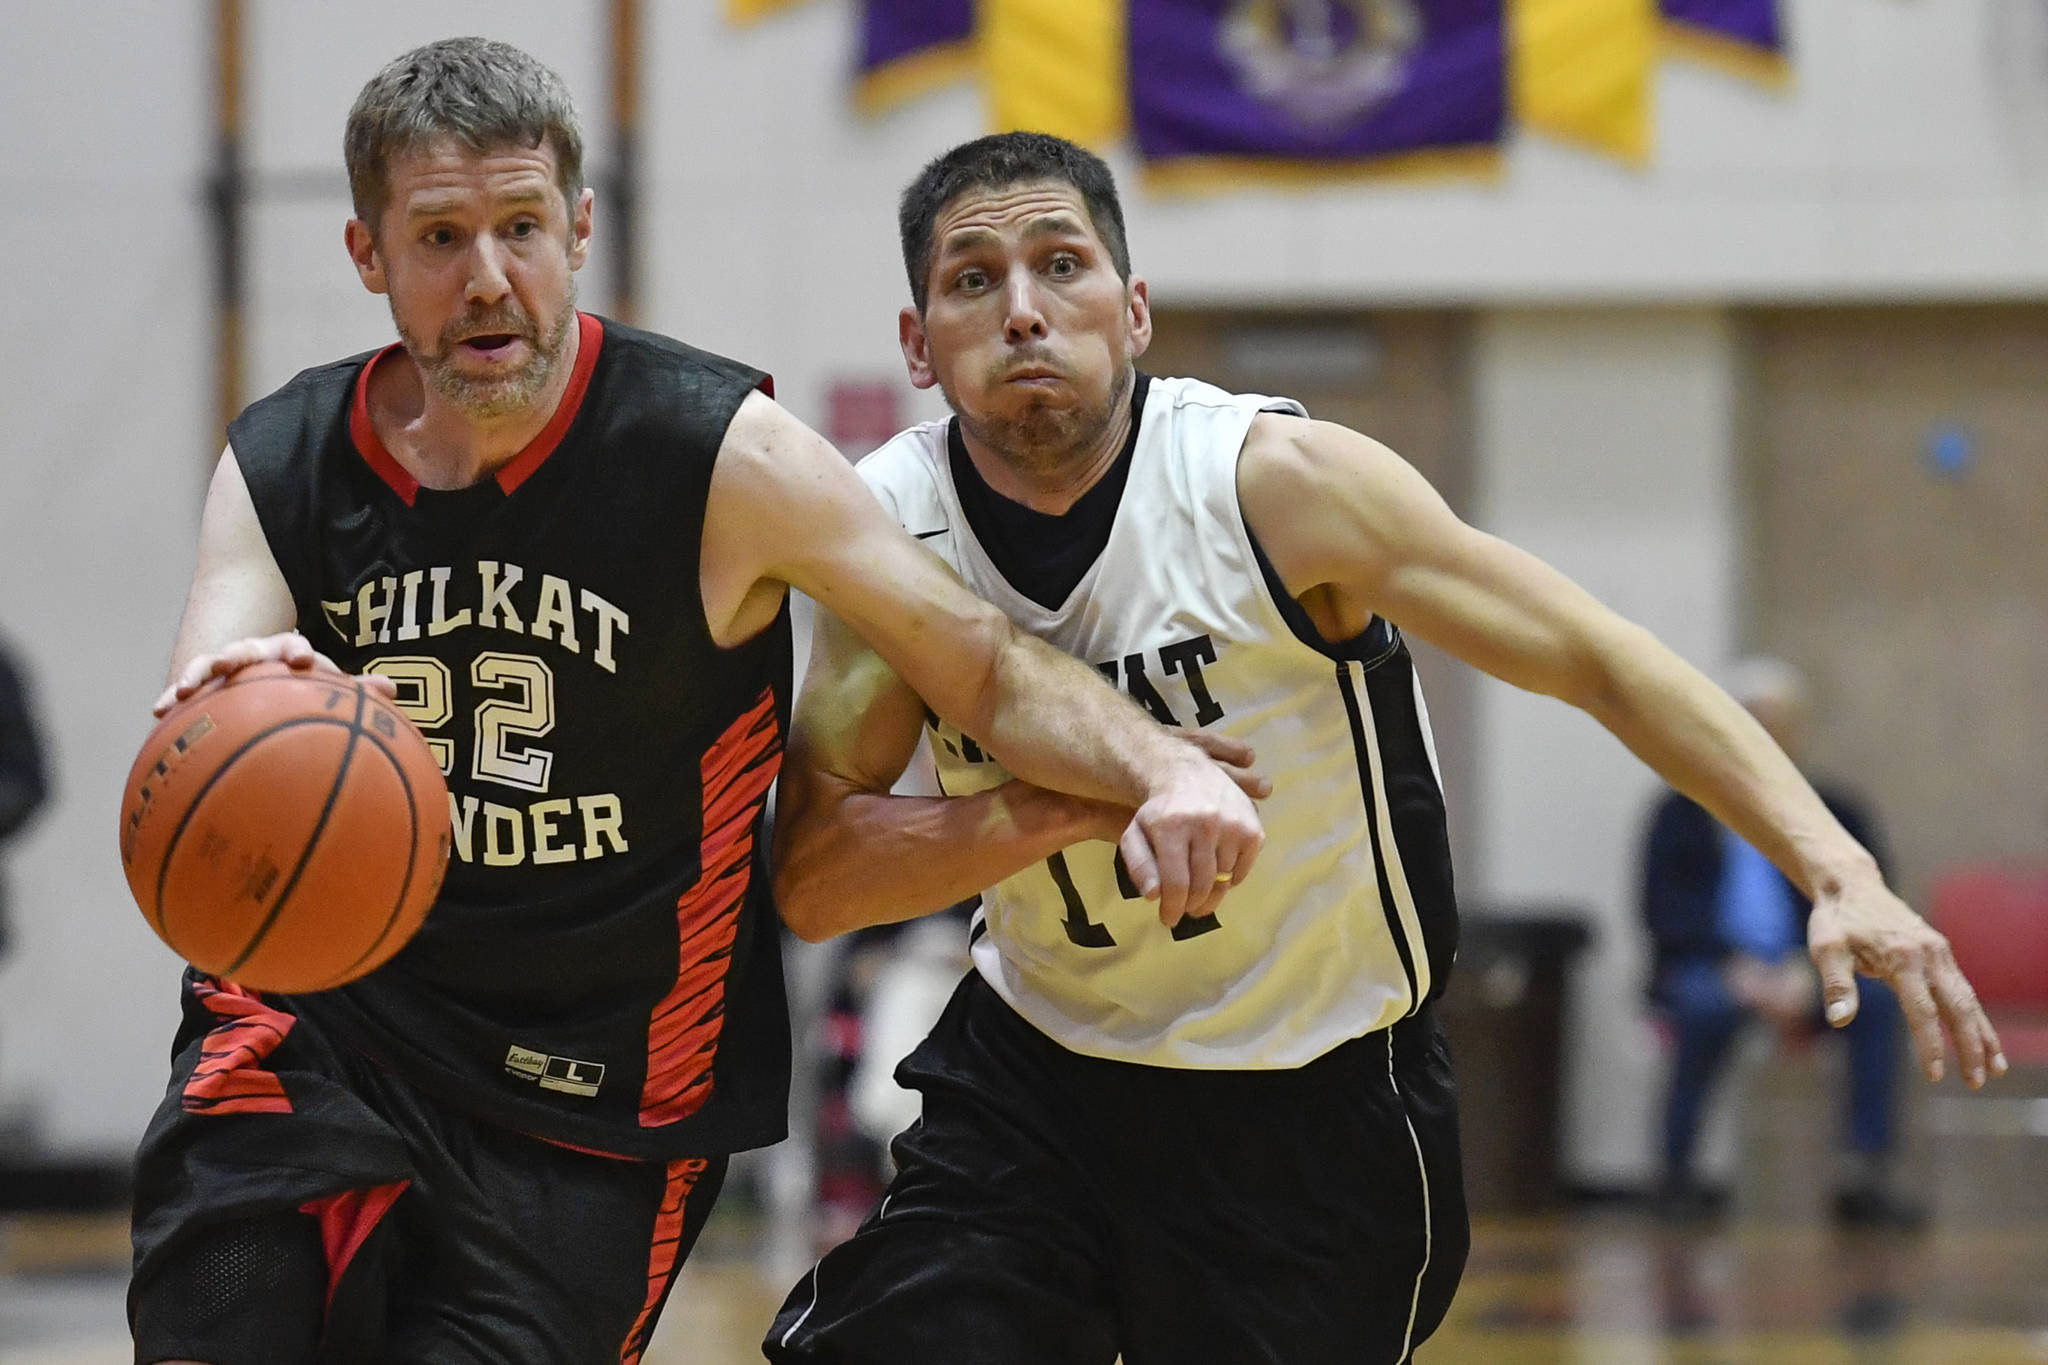 Klukwan’s Dave Buss drives to the basket against Yakutat’s Ralph Johnson during their Masters bracket game at the Juneau Lions Club 73rd Annual Gold Medal Basketball Tournament at Juneau-Douglas High School on Friday, March 22, 2019. Klukwan won 63-58. (Michael Penn | Juneau Empire)